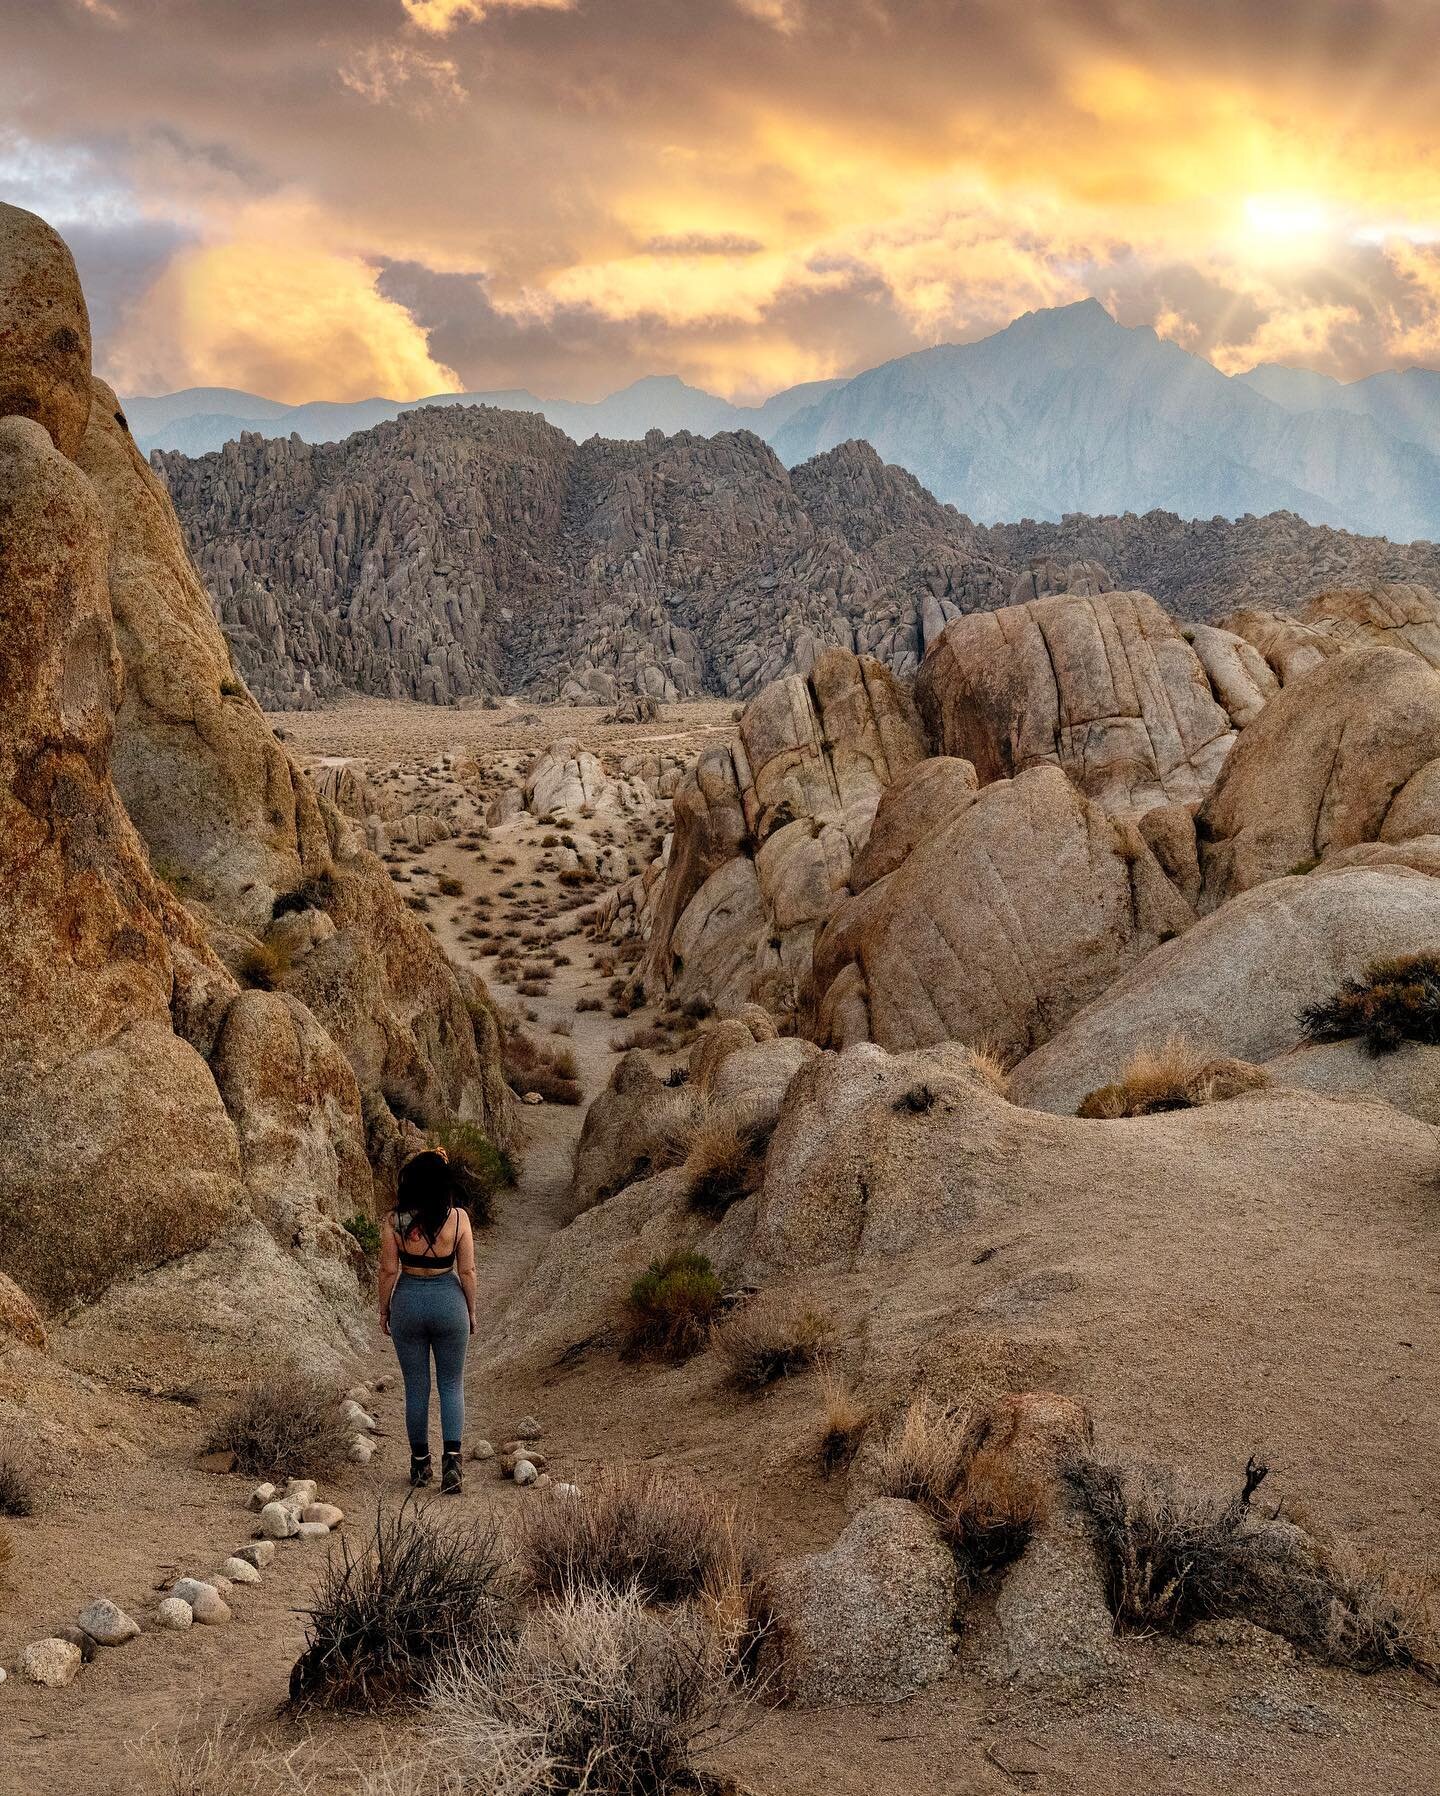 One of the most unique landscapes I&rsquo;ve ever had the pleasure to walk through 😍 and with the Sierras as a backdrop 😮🌄

#naturelovers #desertlife #california #alabamahills #westcoast #easternsierra